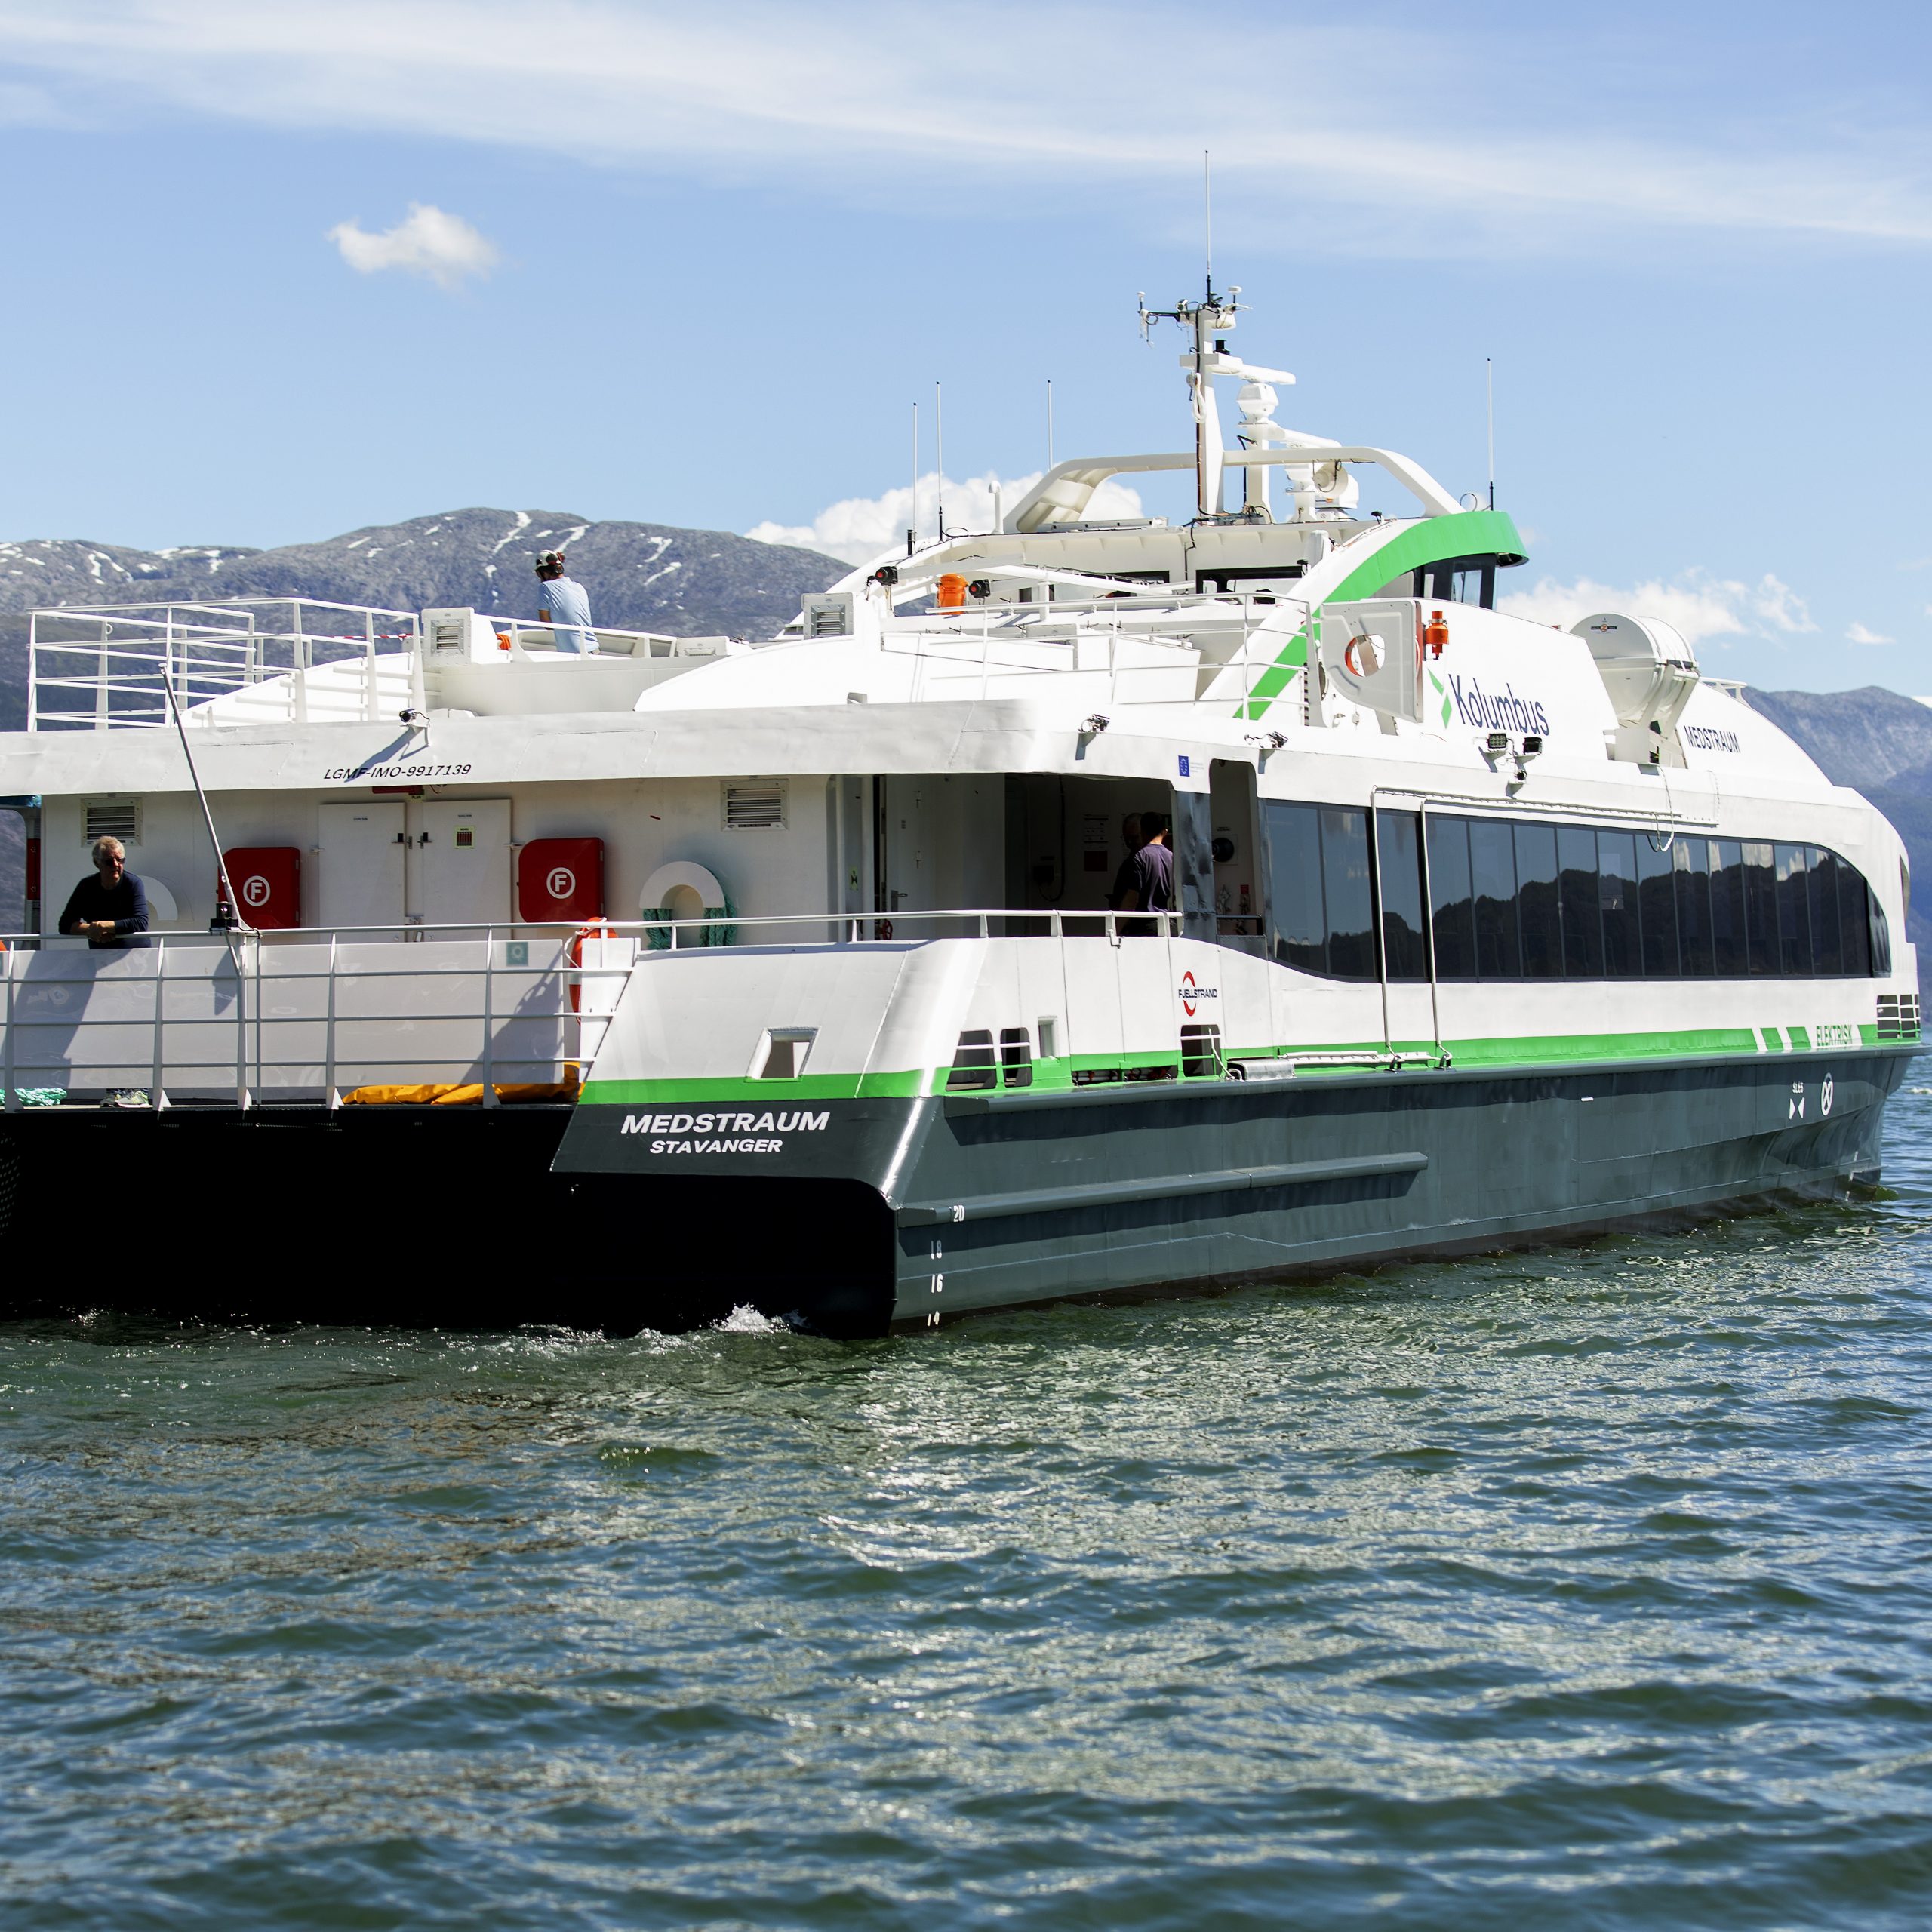 The world’s first zero-emission fast ferry is ready for operation